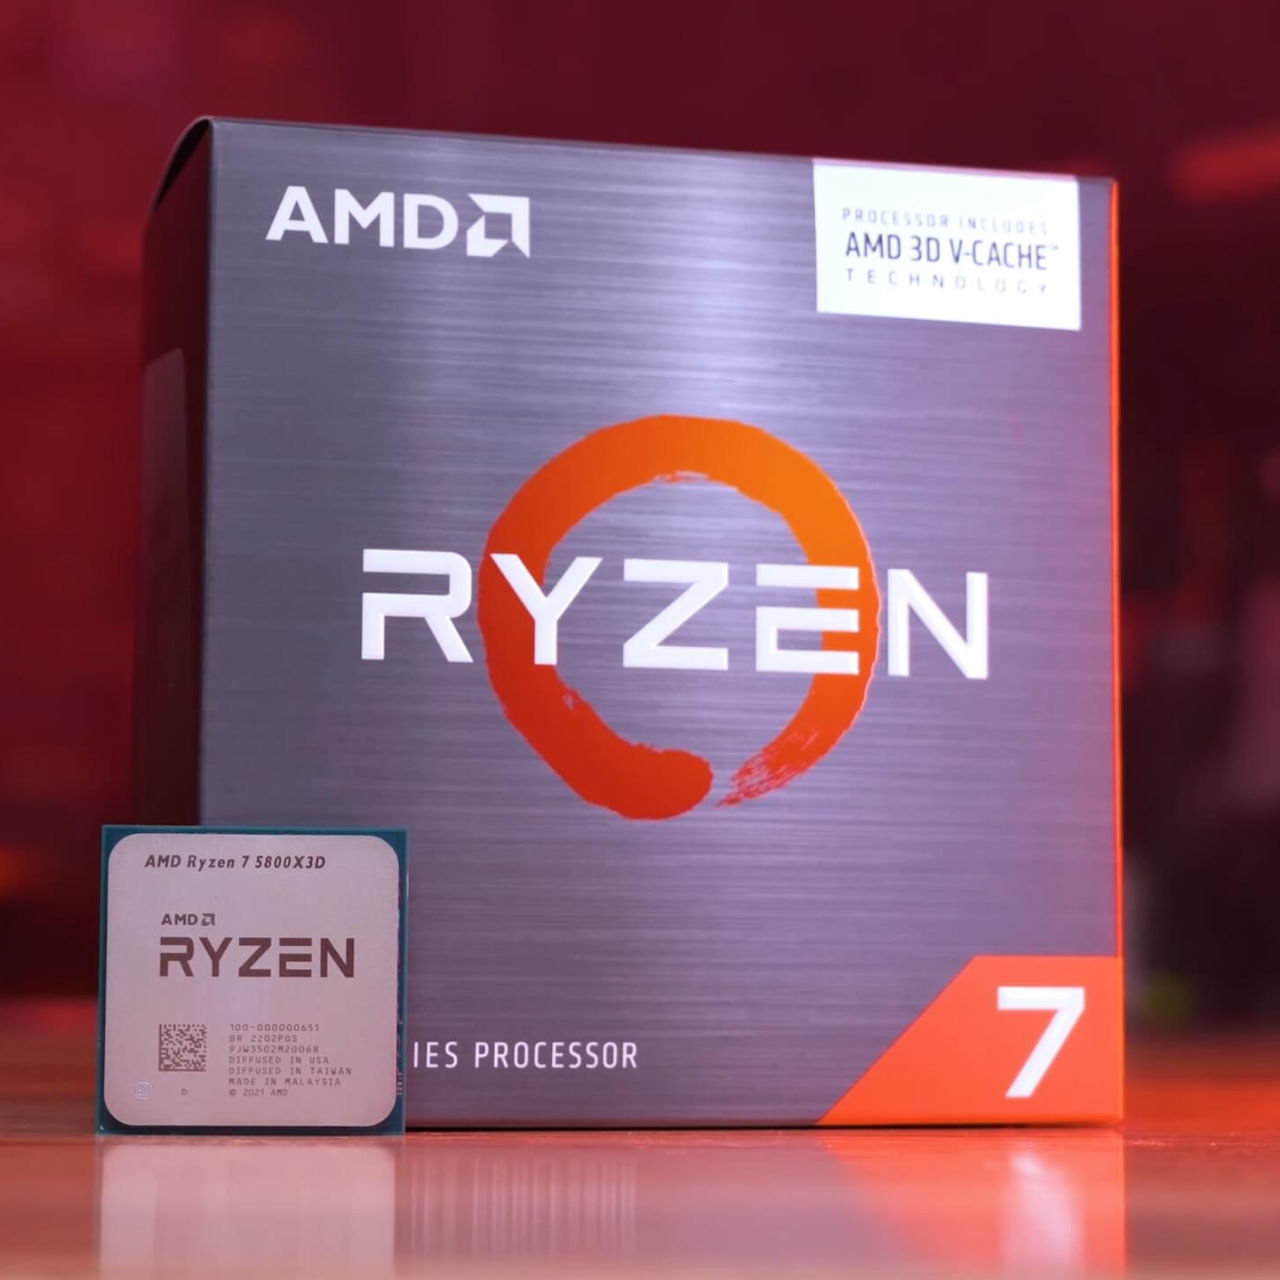 Ryzen 7 with AMD 3D V-Cache